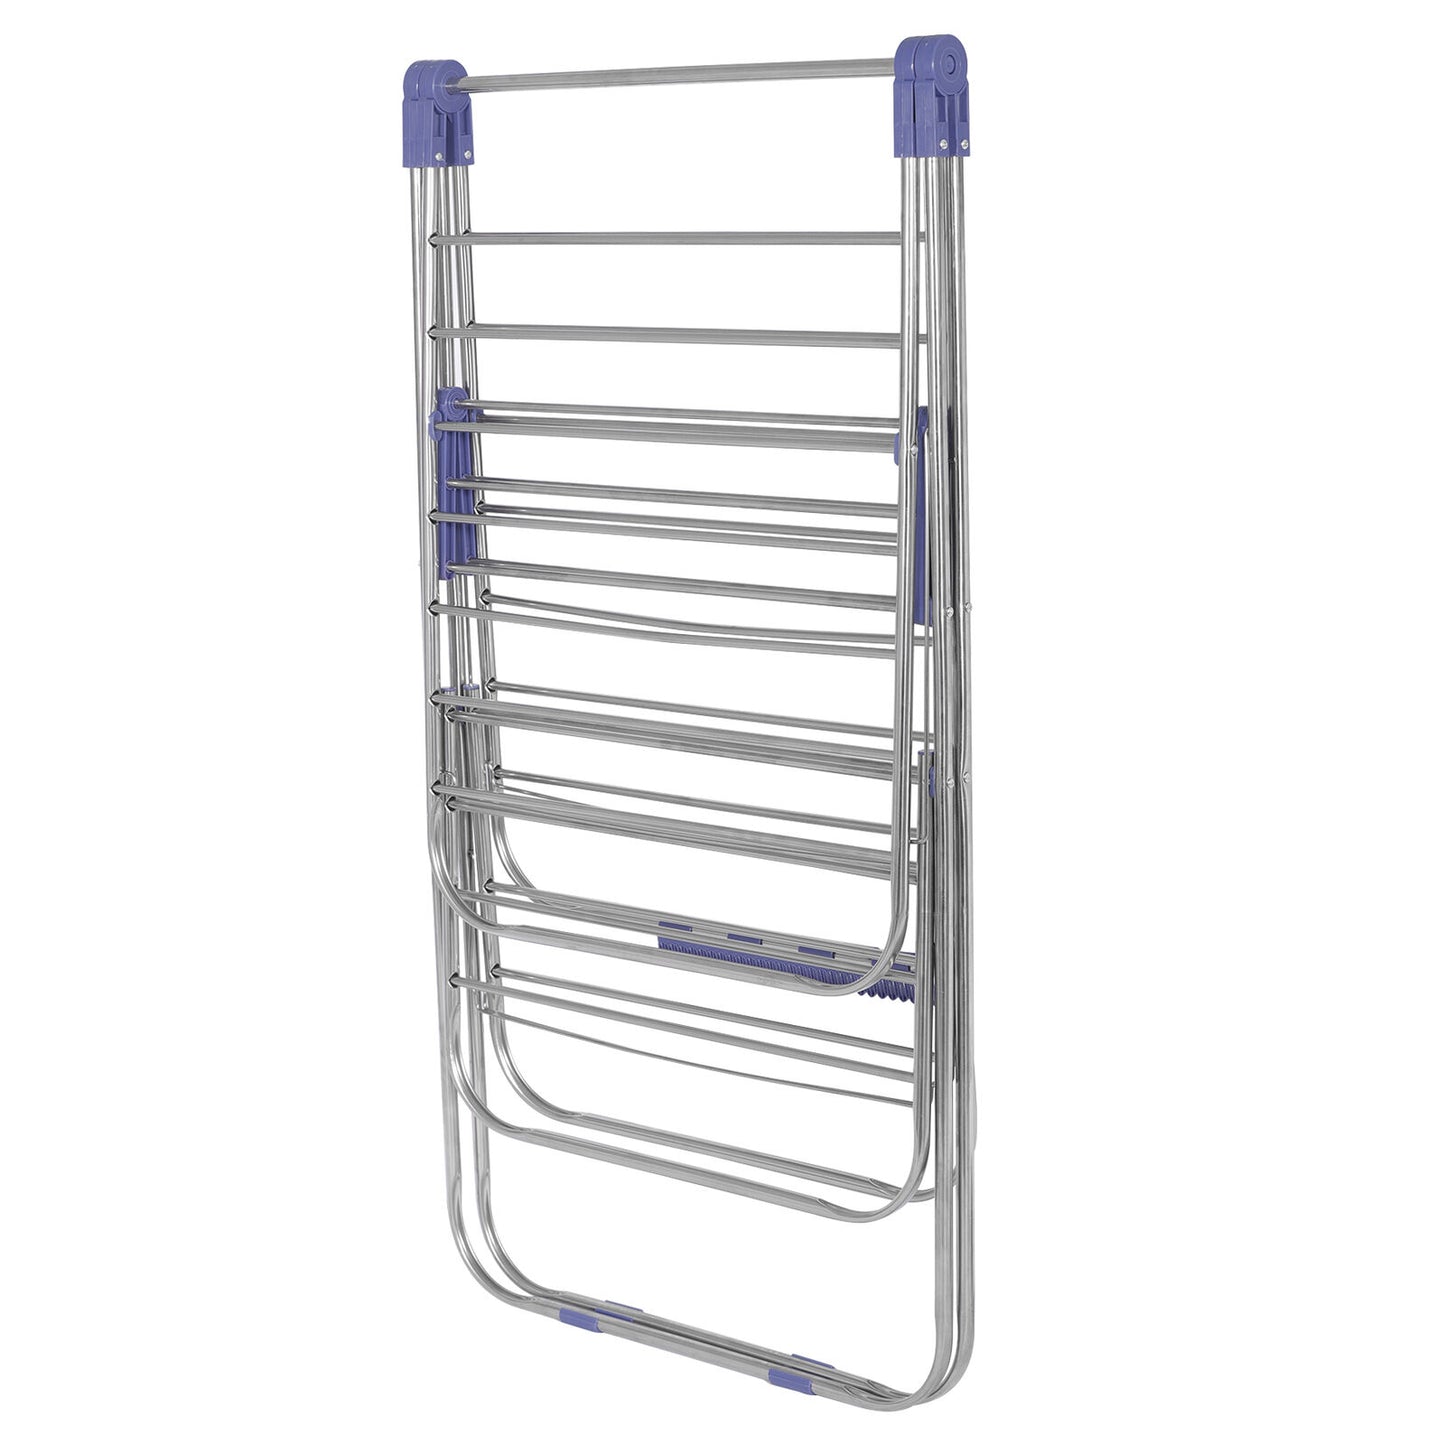 Clothes Drying Rack Foldable 2-Level Laundry Drying Rack 33 Drying Rails